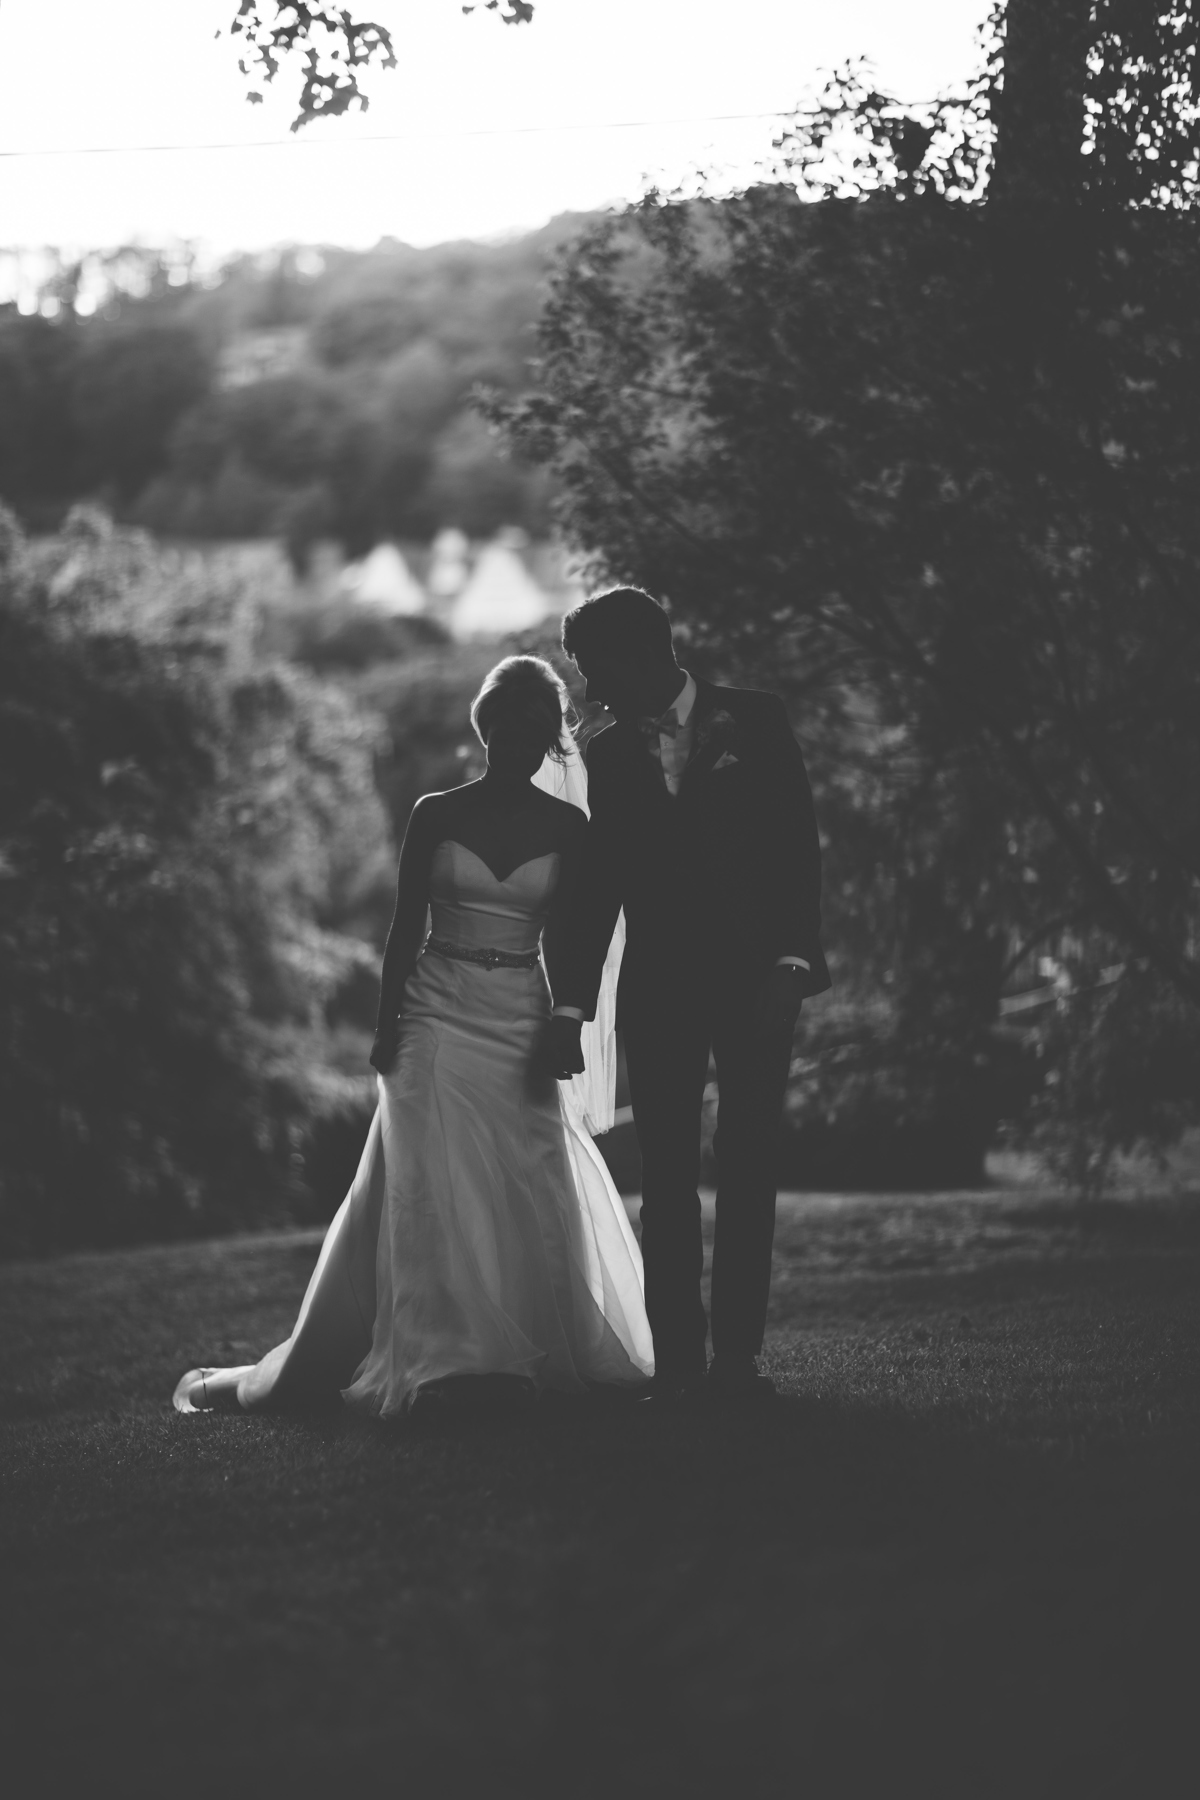 Black and White picture of the Bride and Groom walking throught the garden with trees in the background at Grange Hotel, Cumbria